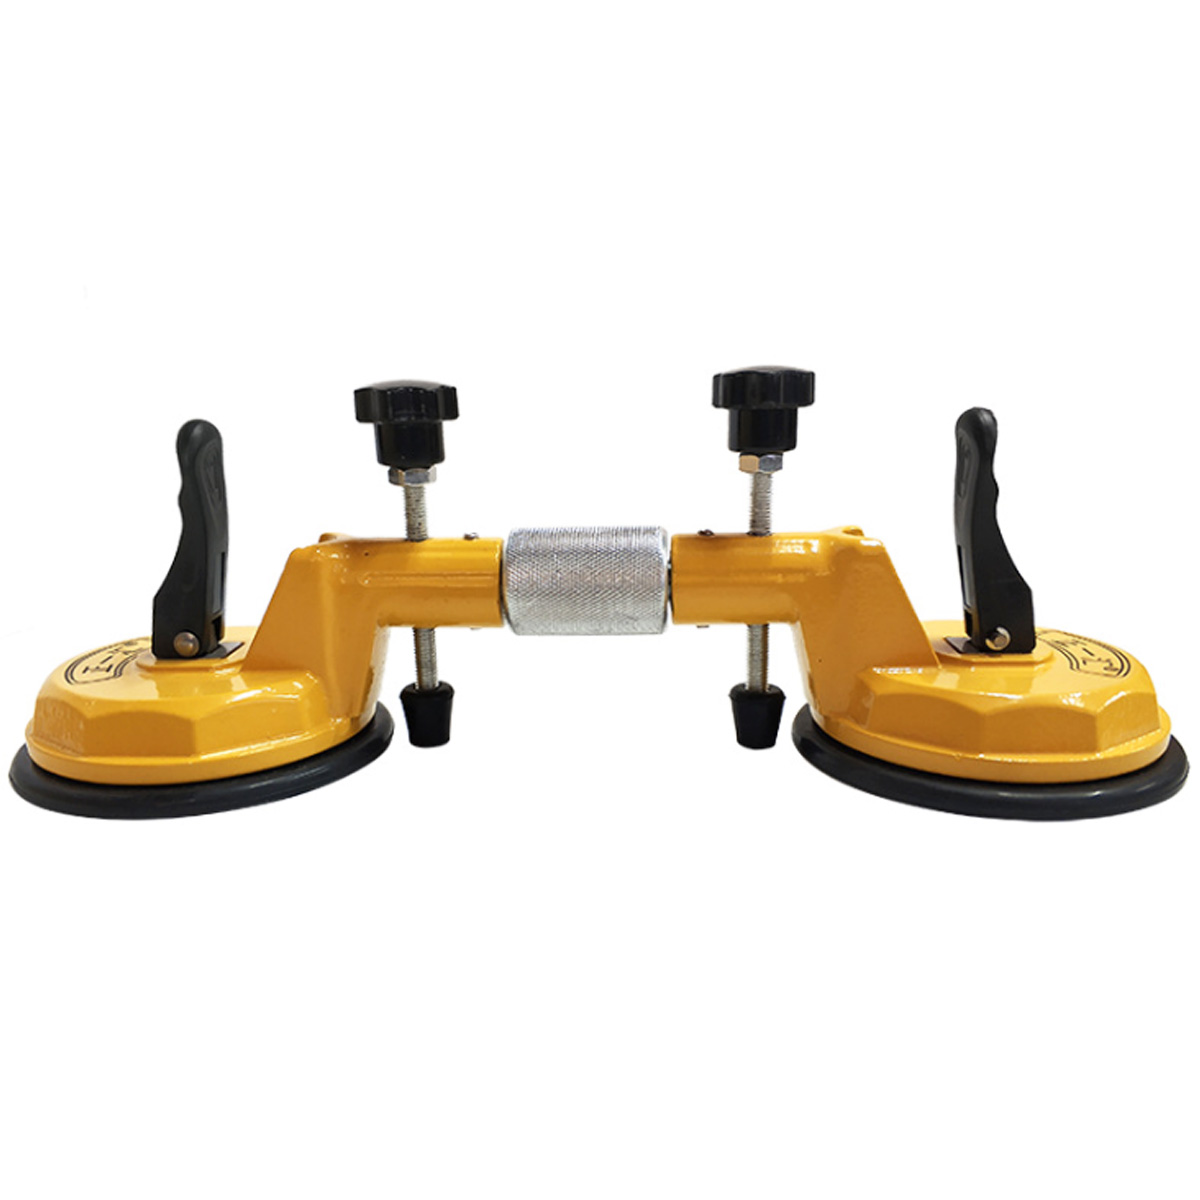 

Stone Seam Setter Seam Leveling Joining Stone Tiles Marble Suction Cup Aluminium